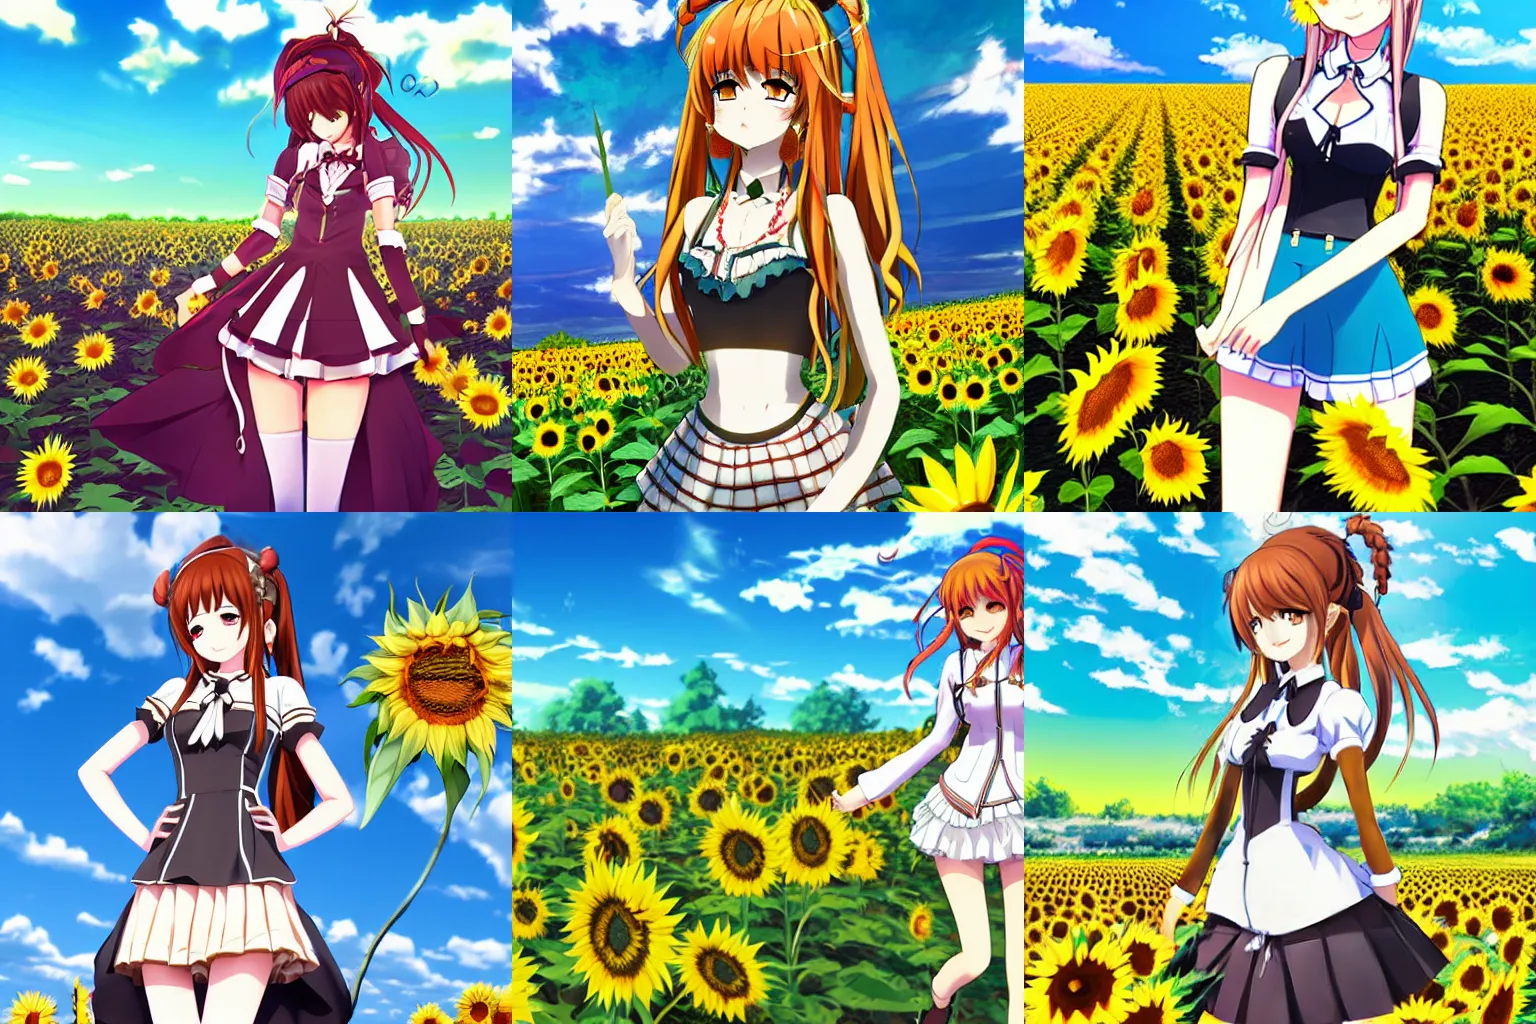 Prompt: High Detail High Contrast Anime Key Visual of Monika, from DDLC, wearing a summer outfit on a sunflower field.